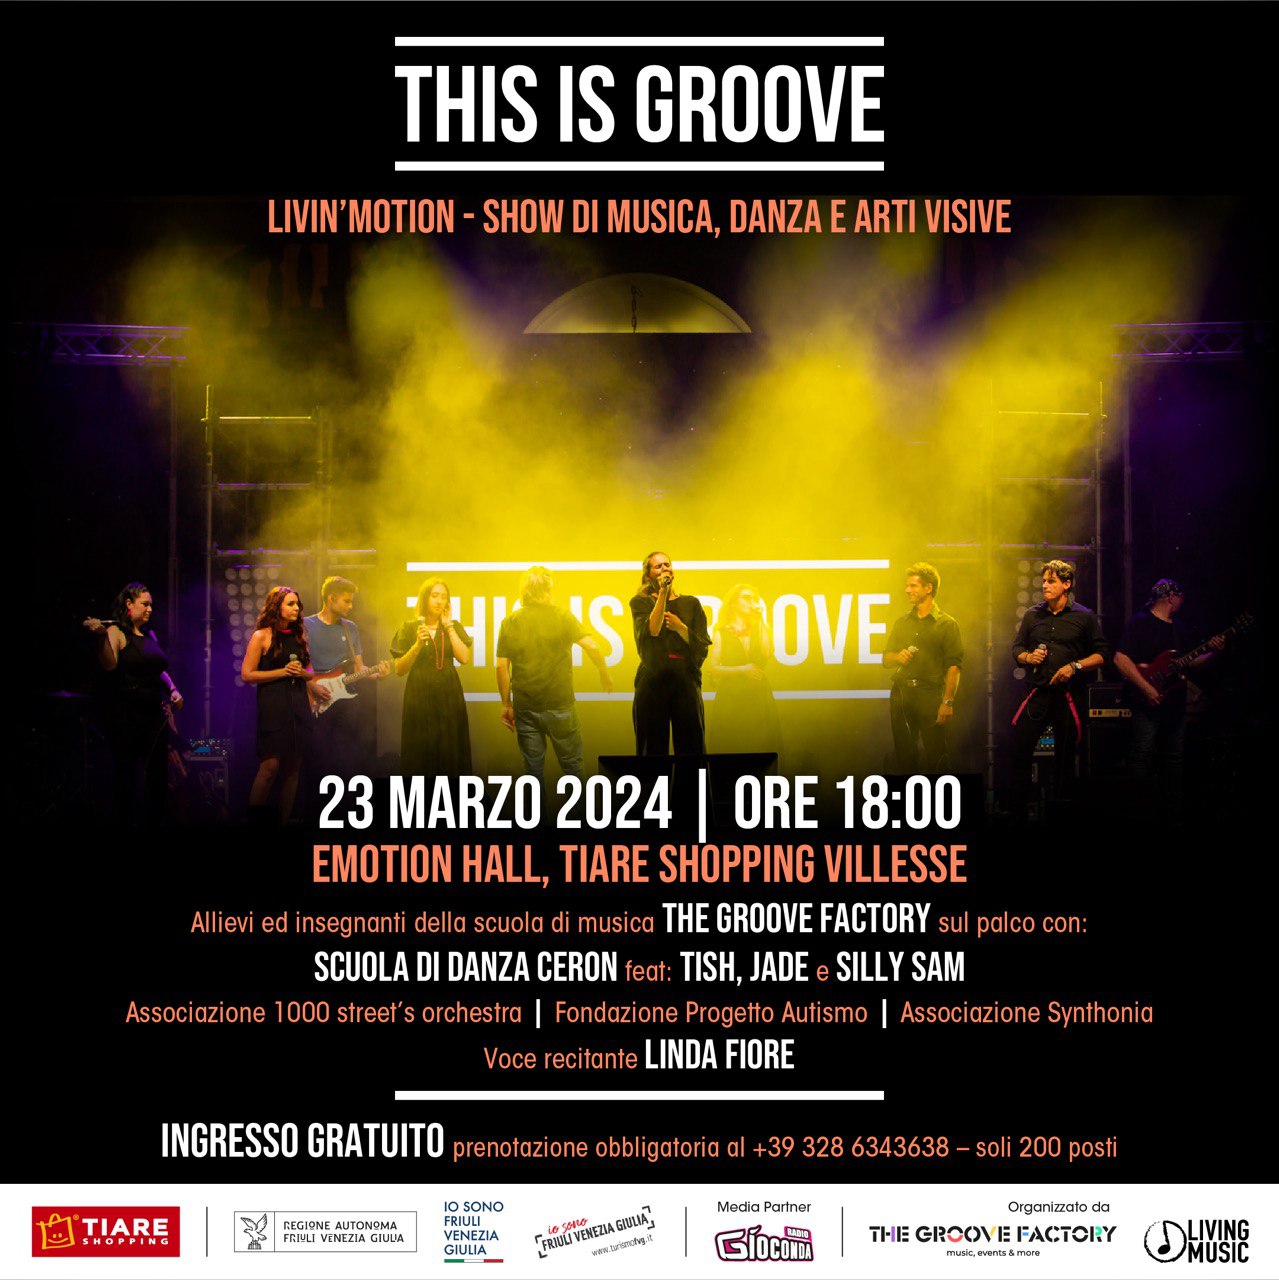 THIS IS GROOVE, LIVIN' MOTION, Tiare Shopping